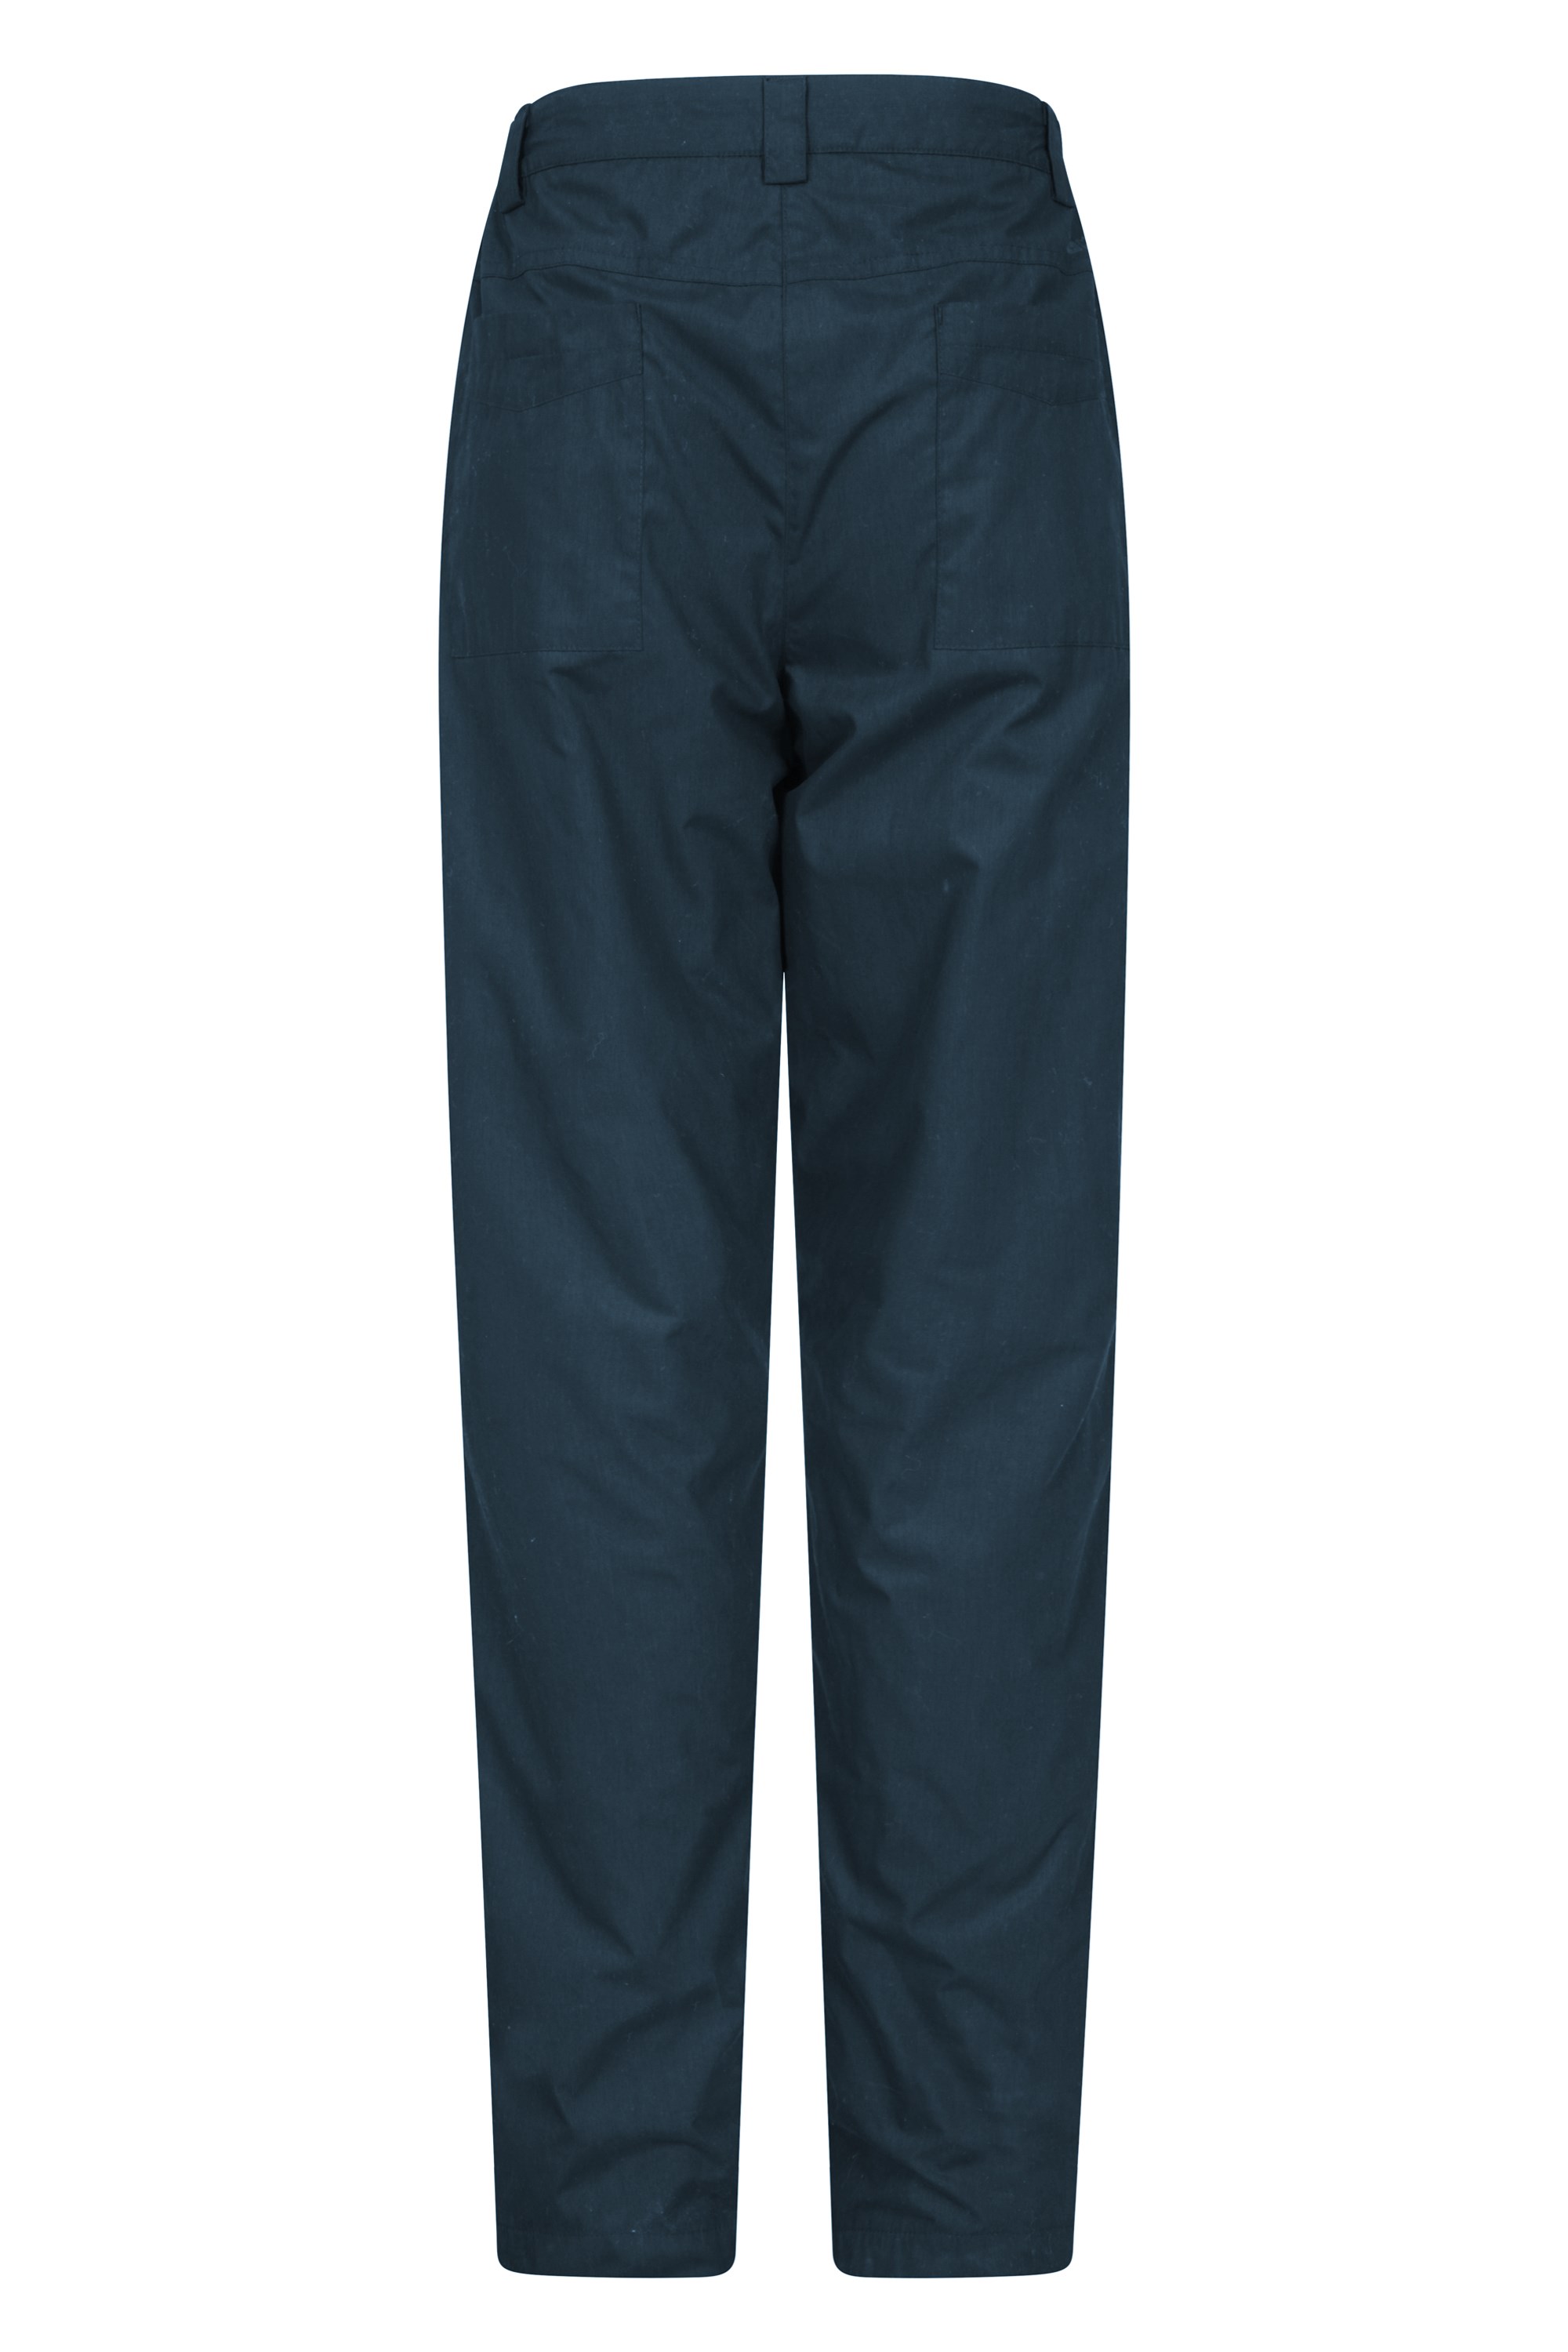 Ping Ladies Straight Leg Trouser with FleeceLining in Blue